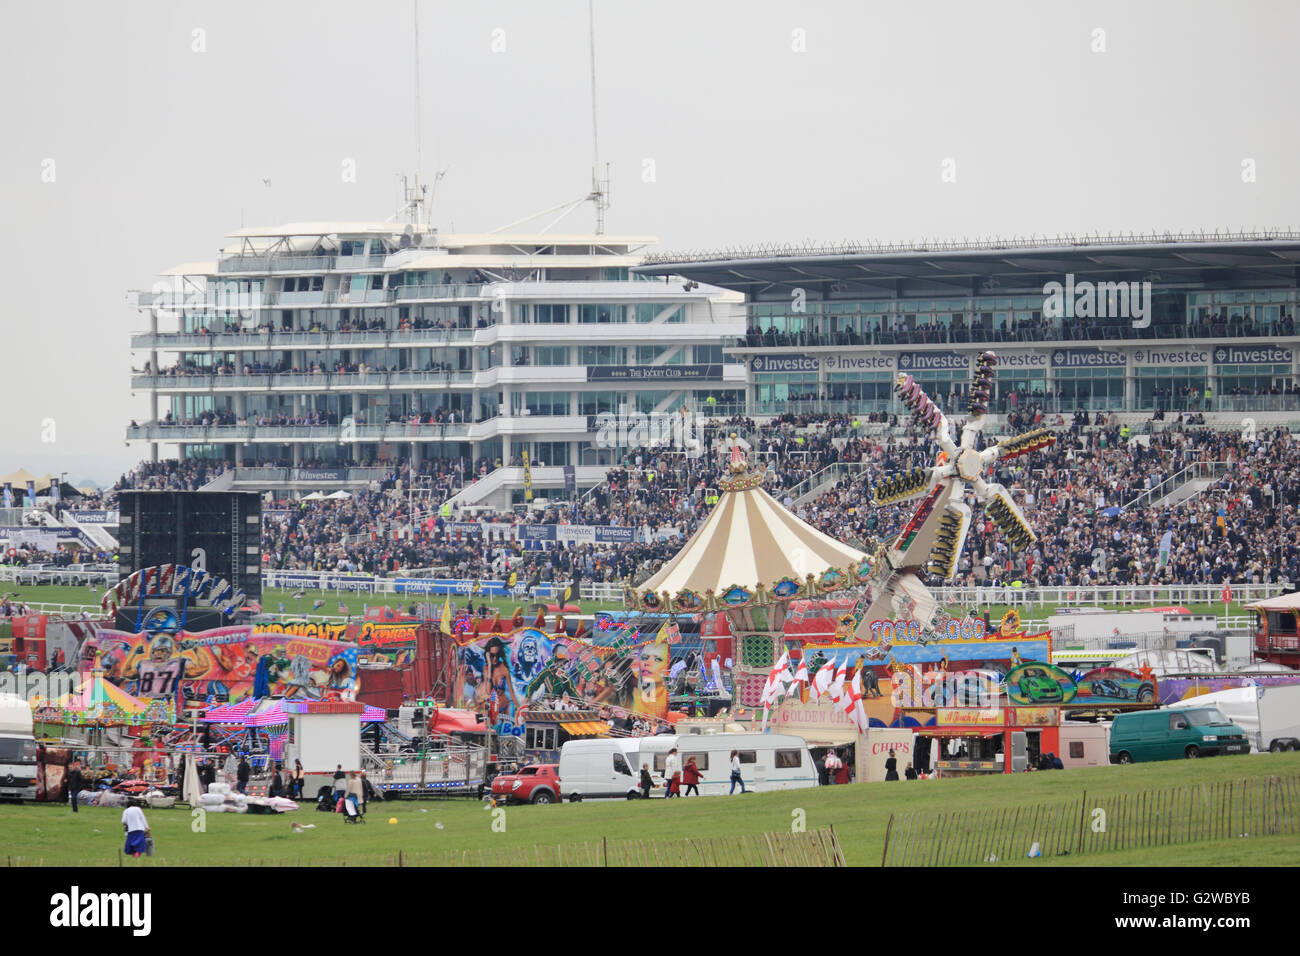 Epsom Downs, Surrey, England, UK. 3rd June 2016. Ladies Day at Epsom Downs race course. The traditional fun fair in front of the grandstand creates a family friendly carnival atmosphere, where the general public and the paying race goers come together to see the best flat racing in the world. Credit:  Julia Gavin UK/Alamy Live News Stock Photo